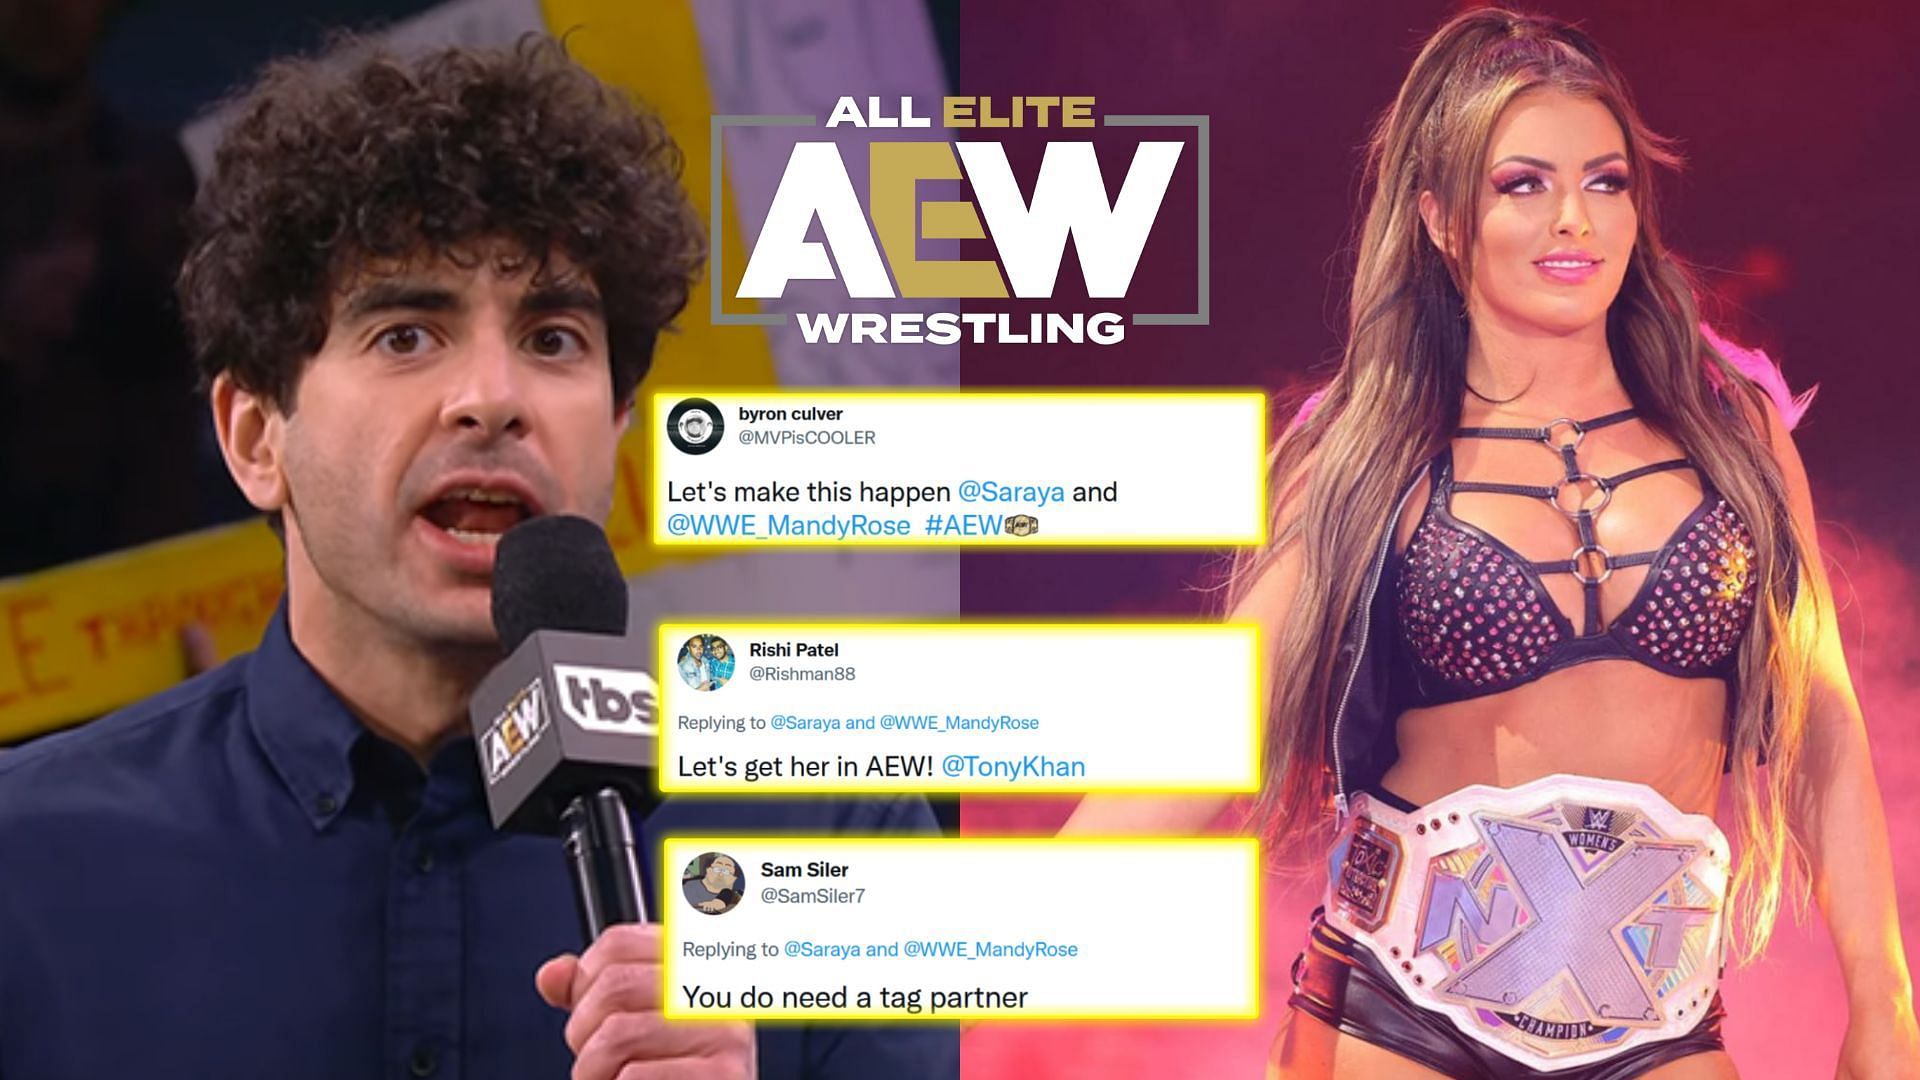 Fans want Tony Khan to hire Mandy Rose to AEW